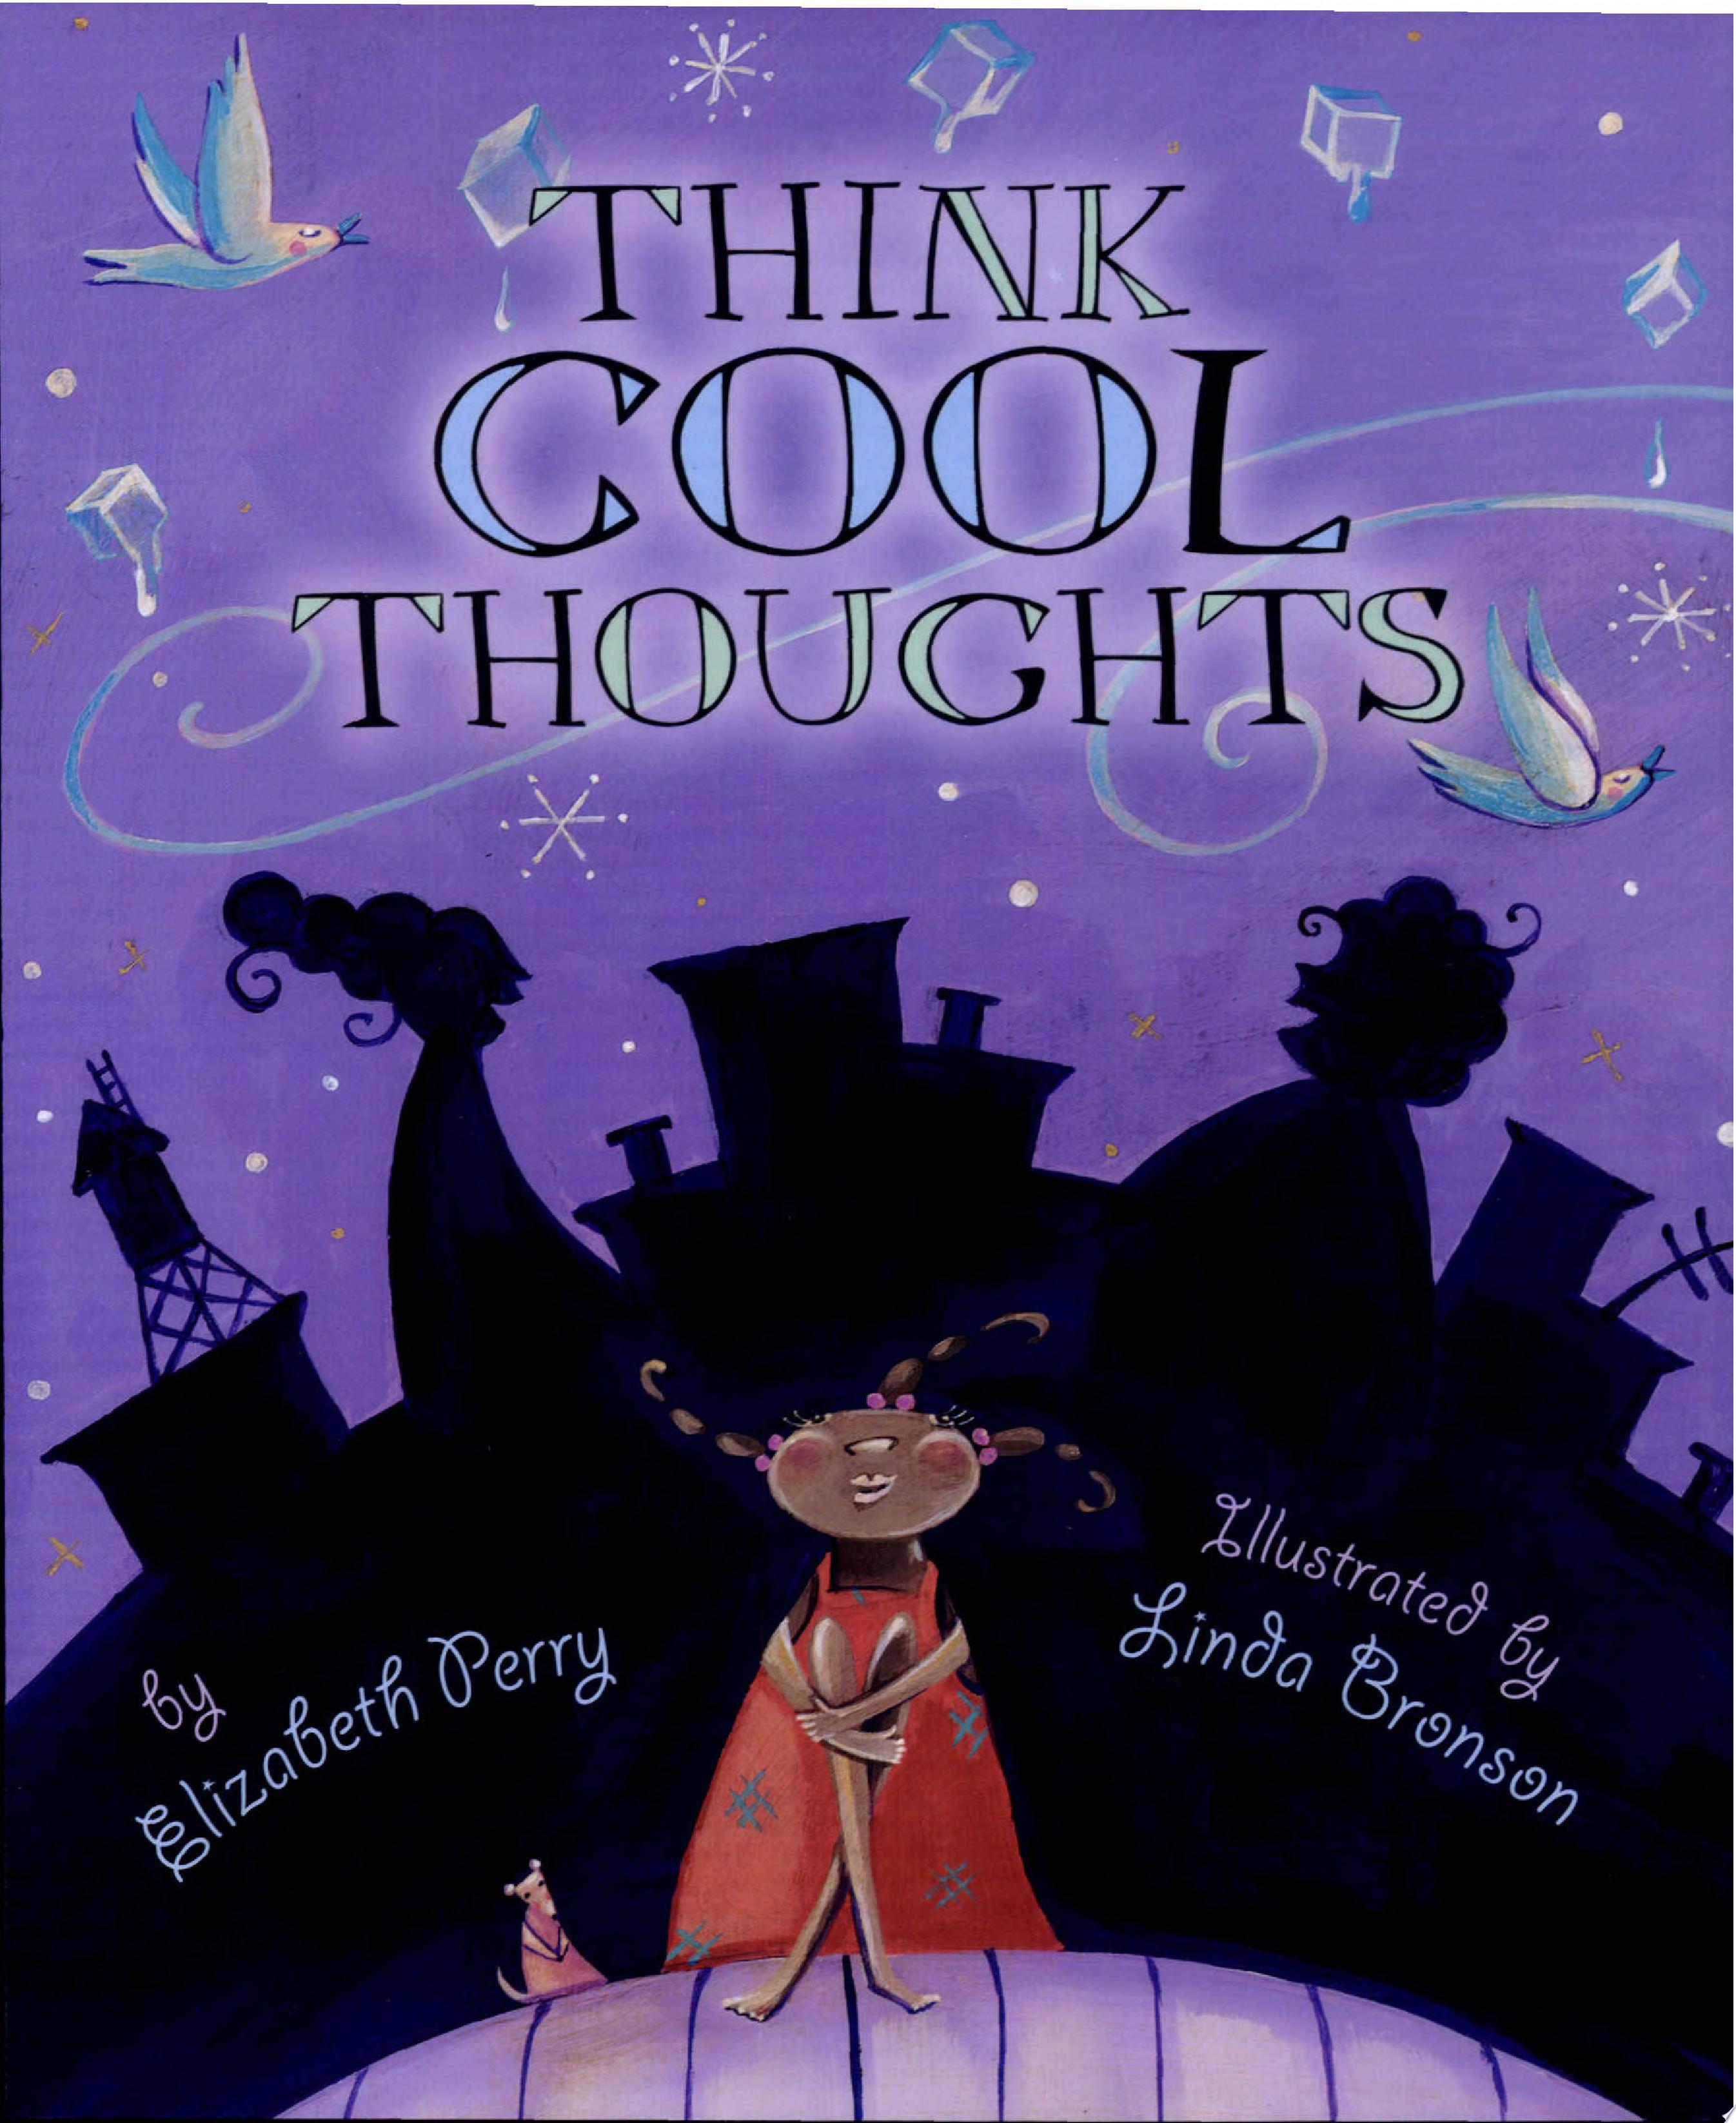 Image for "Think Cool Thoughts"